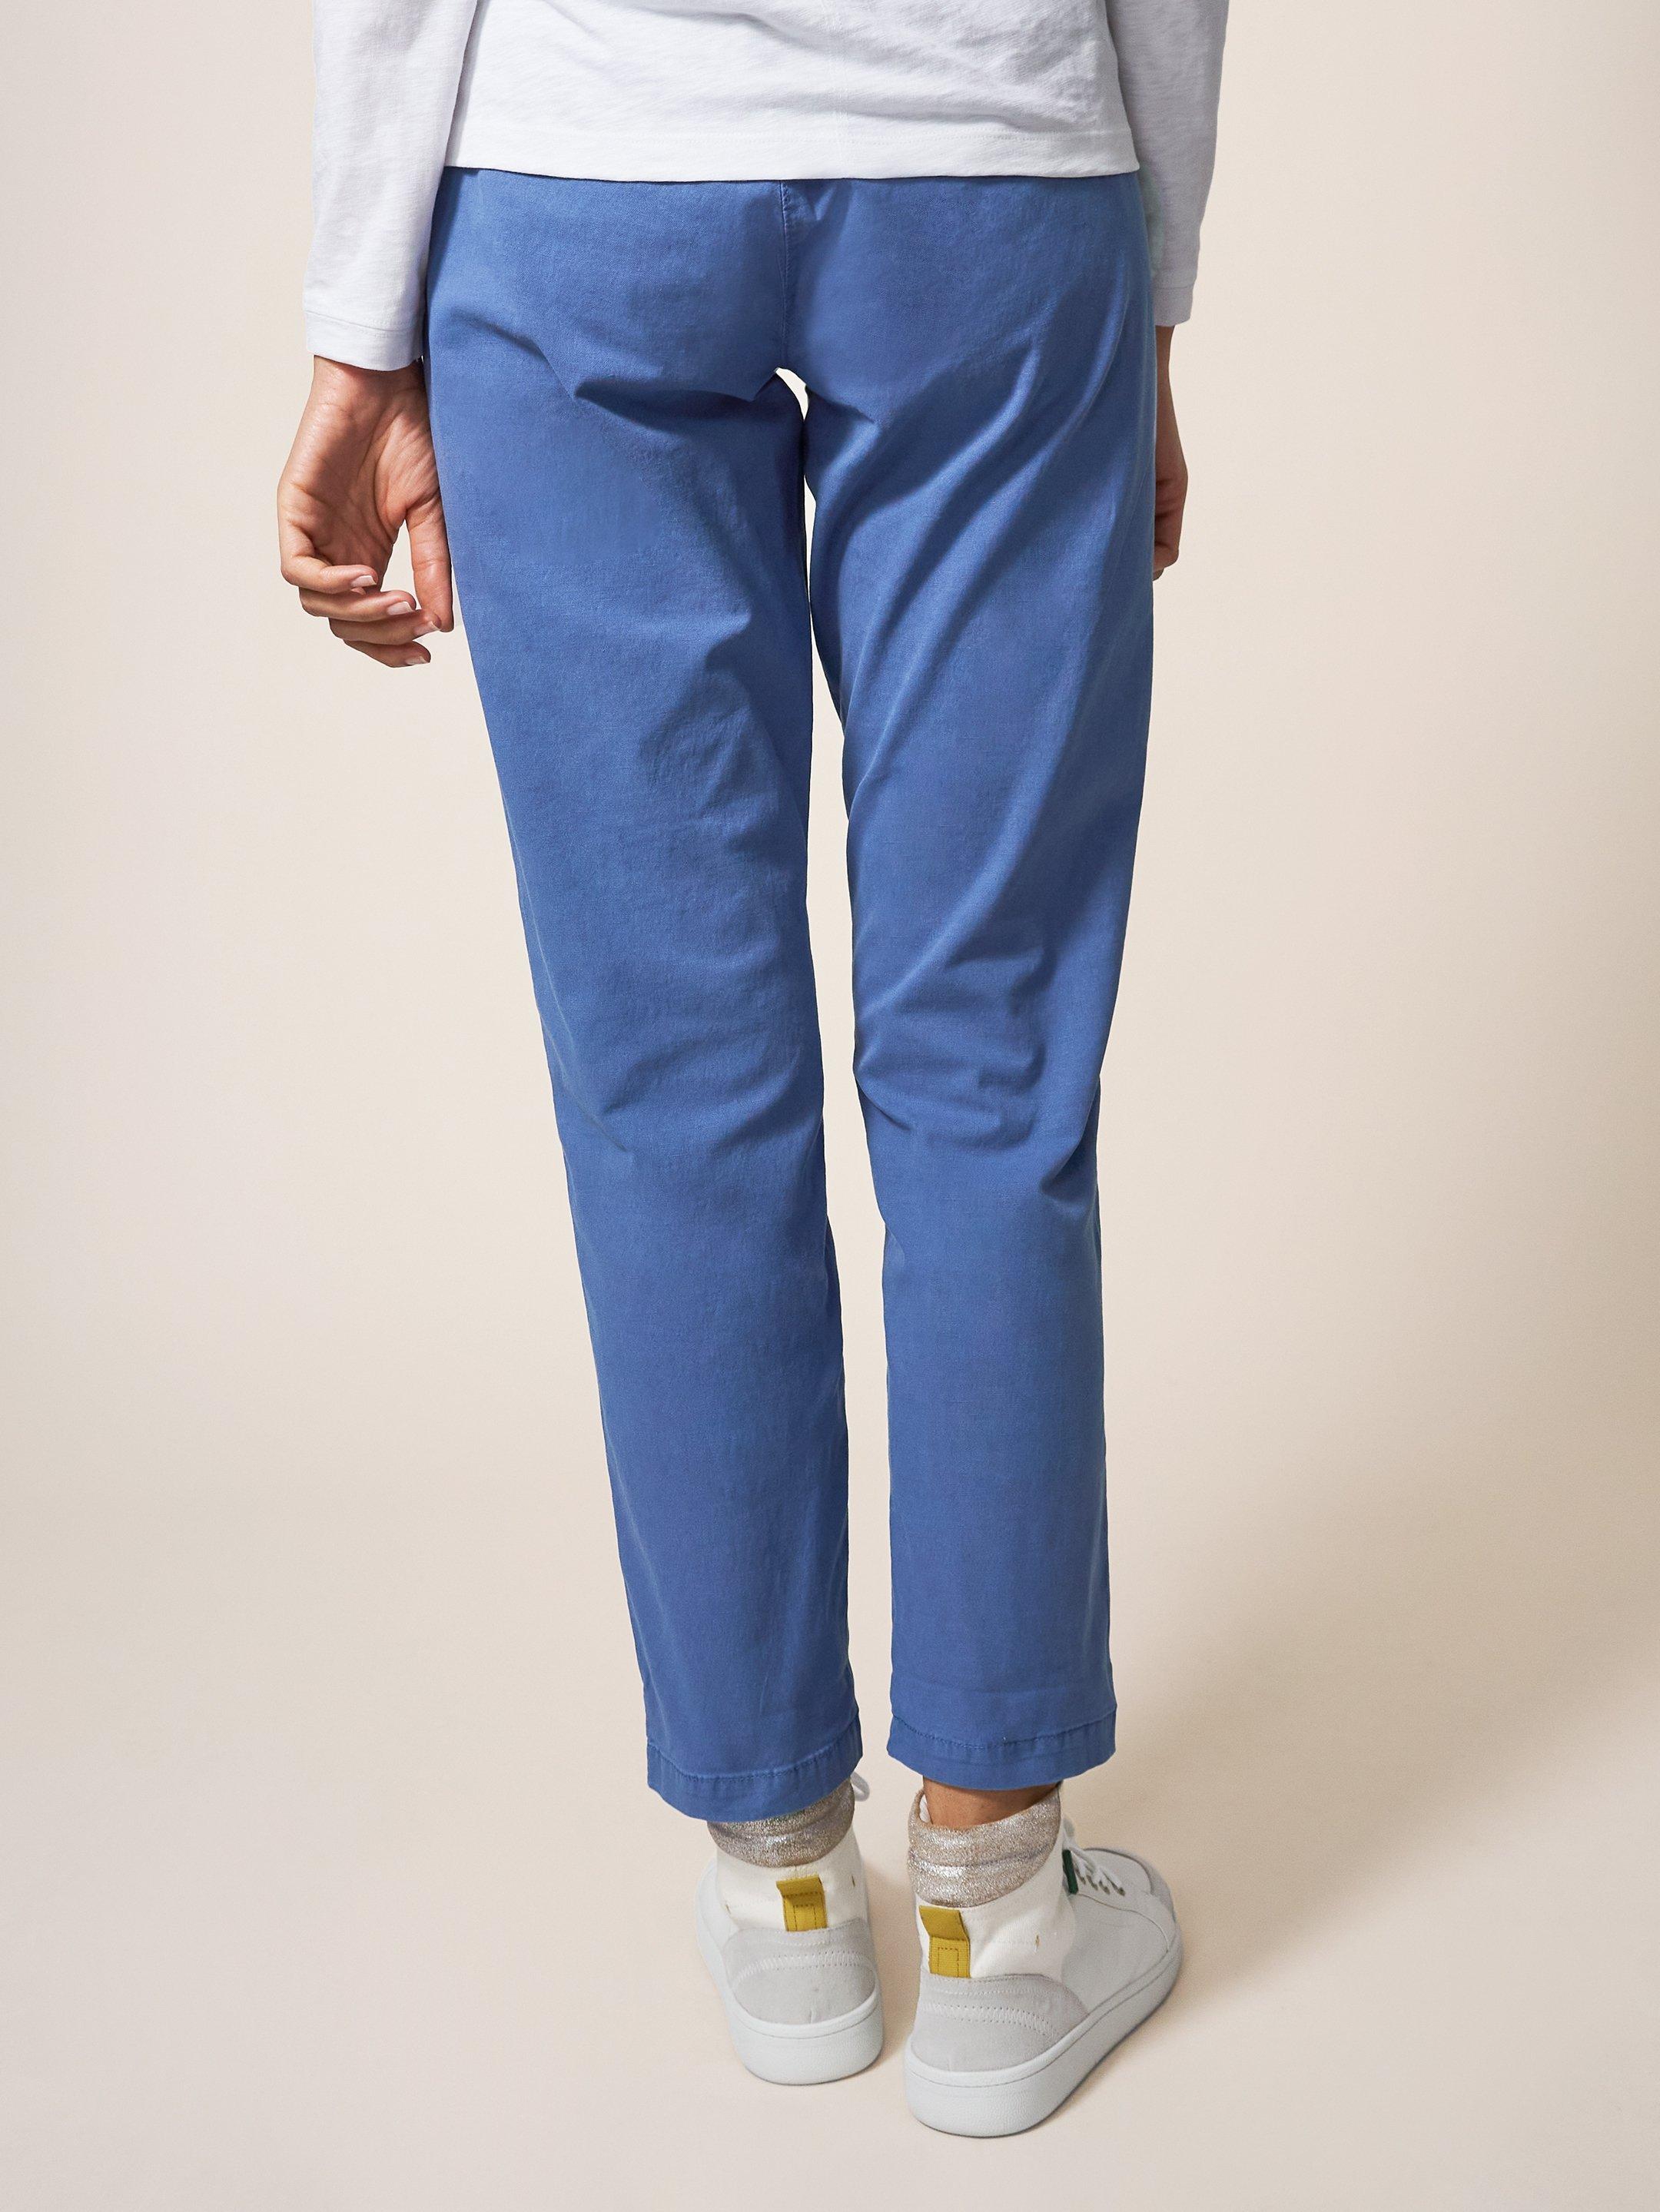 Twister Chino in MID BLUE - MODEL BACK